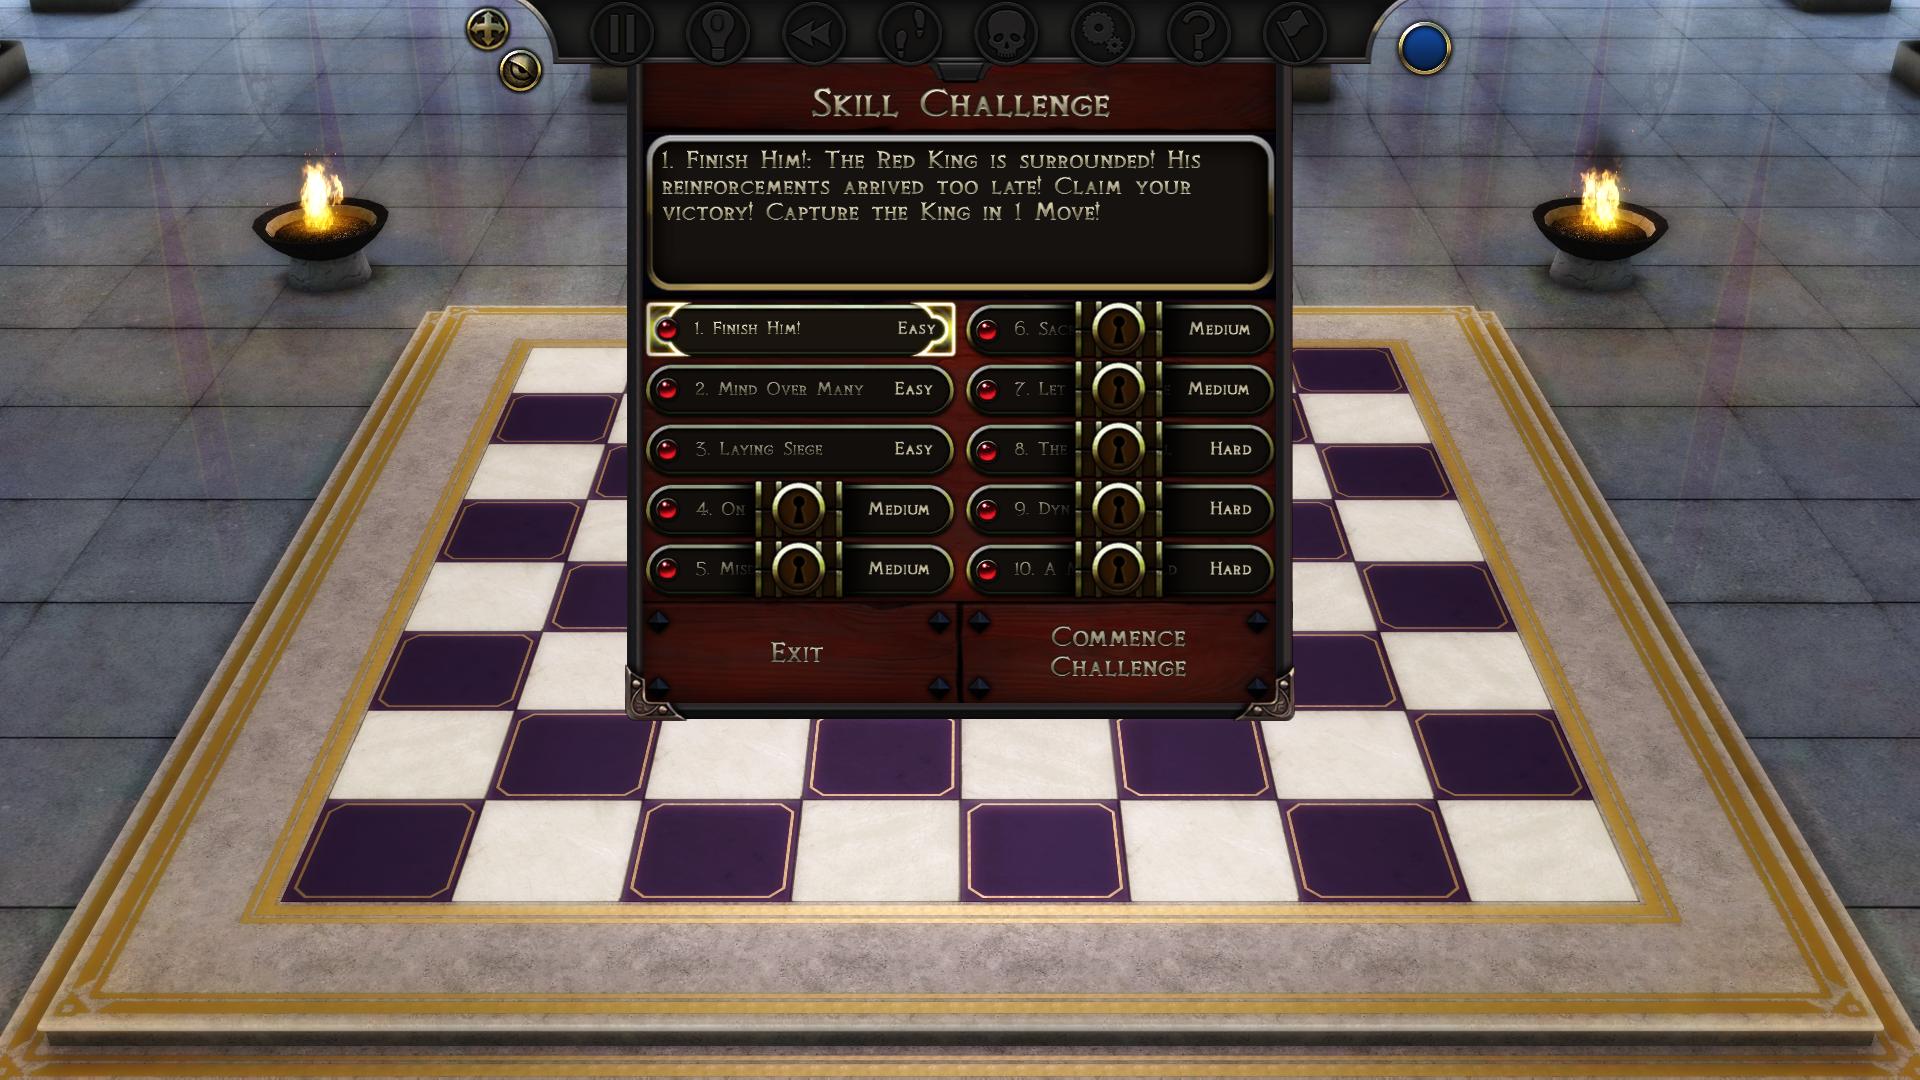 Medieval Royal Chess: Classic Board Game/Nintendo Switch/eShop Download